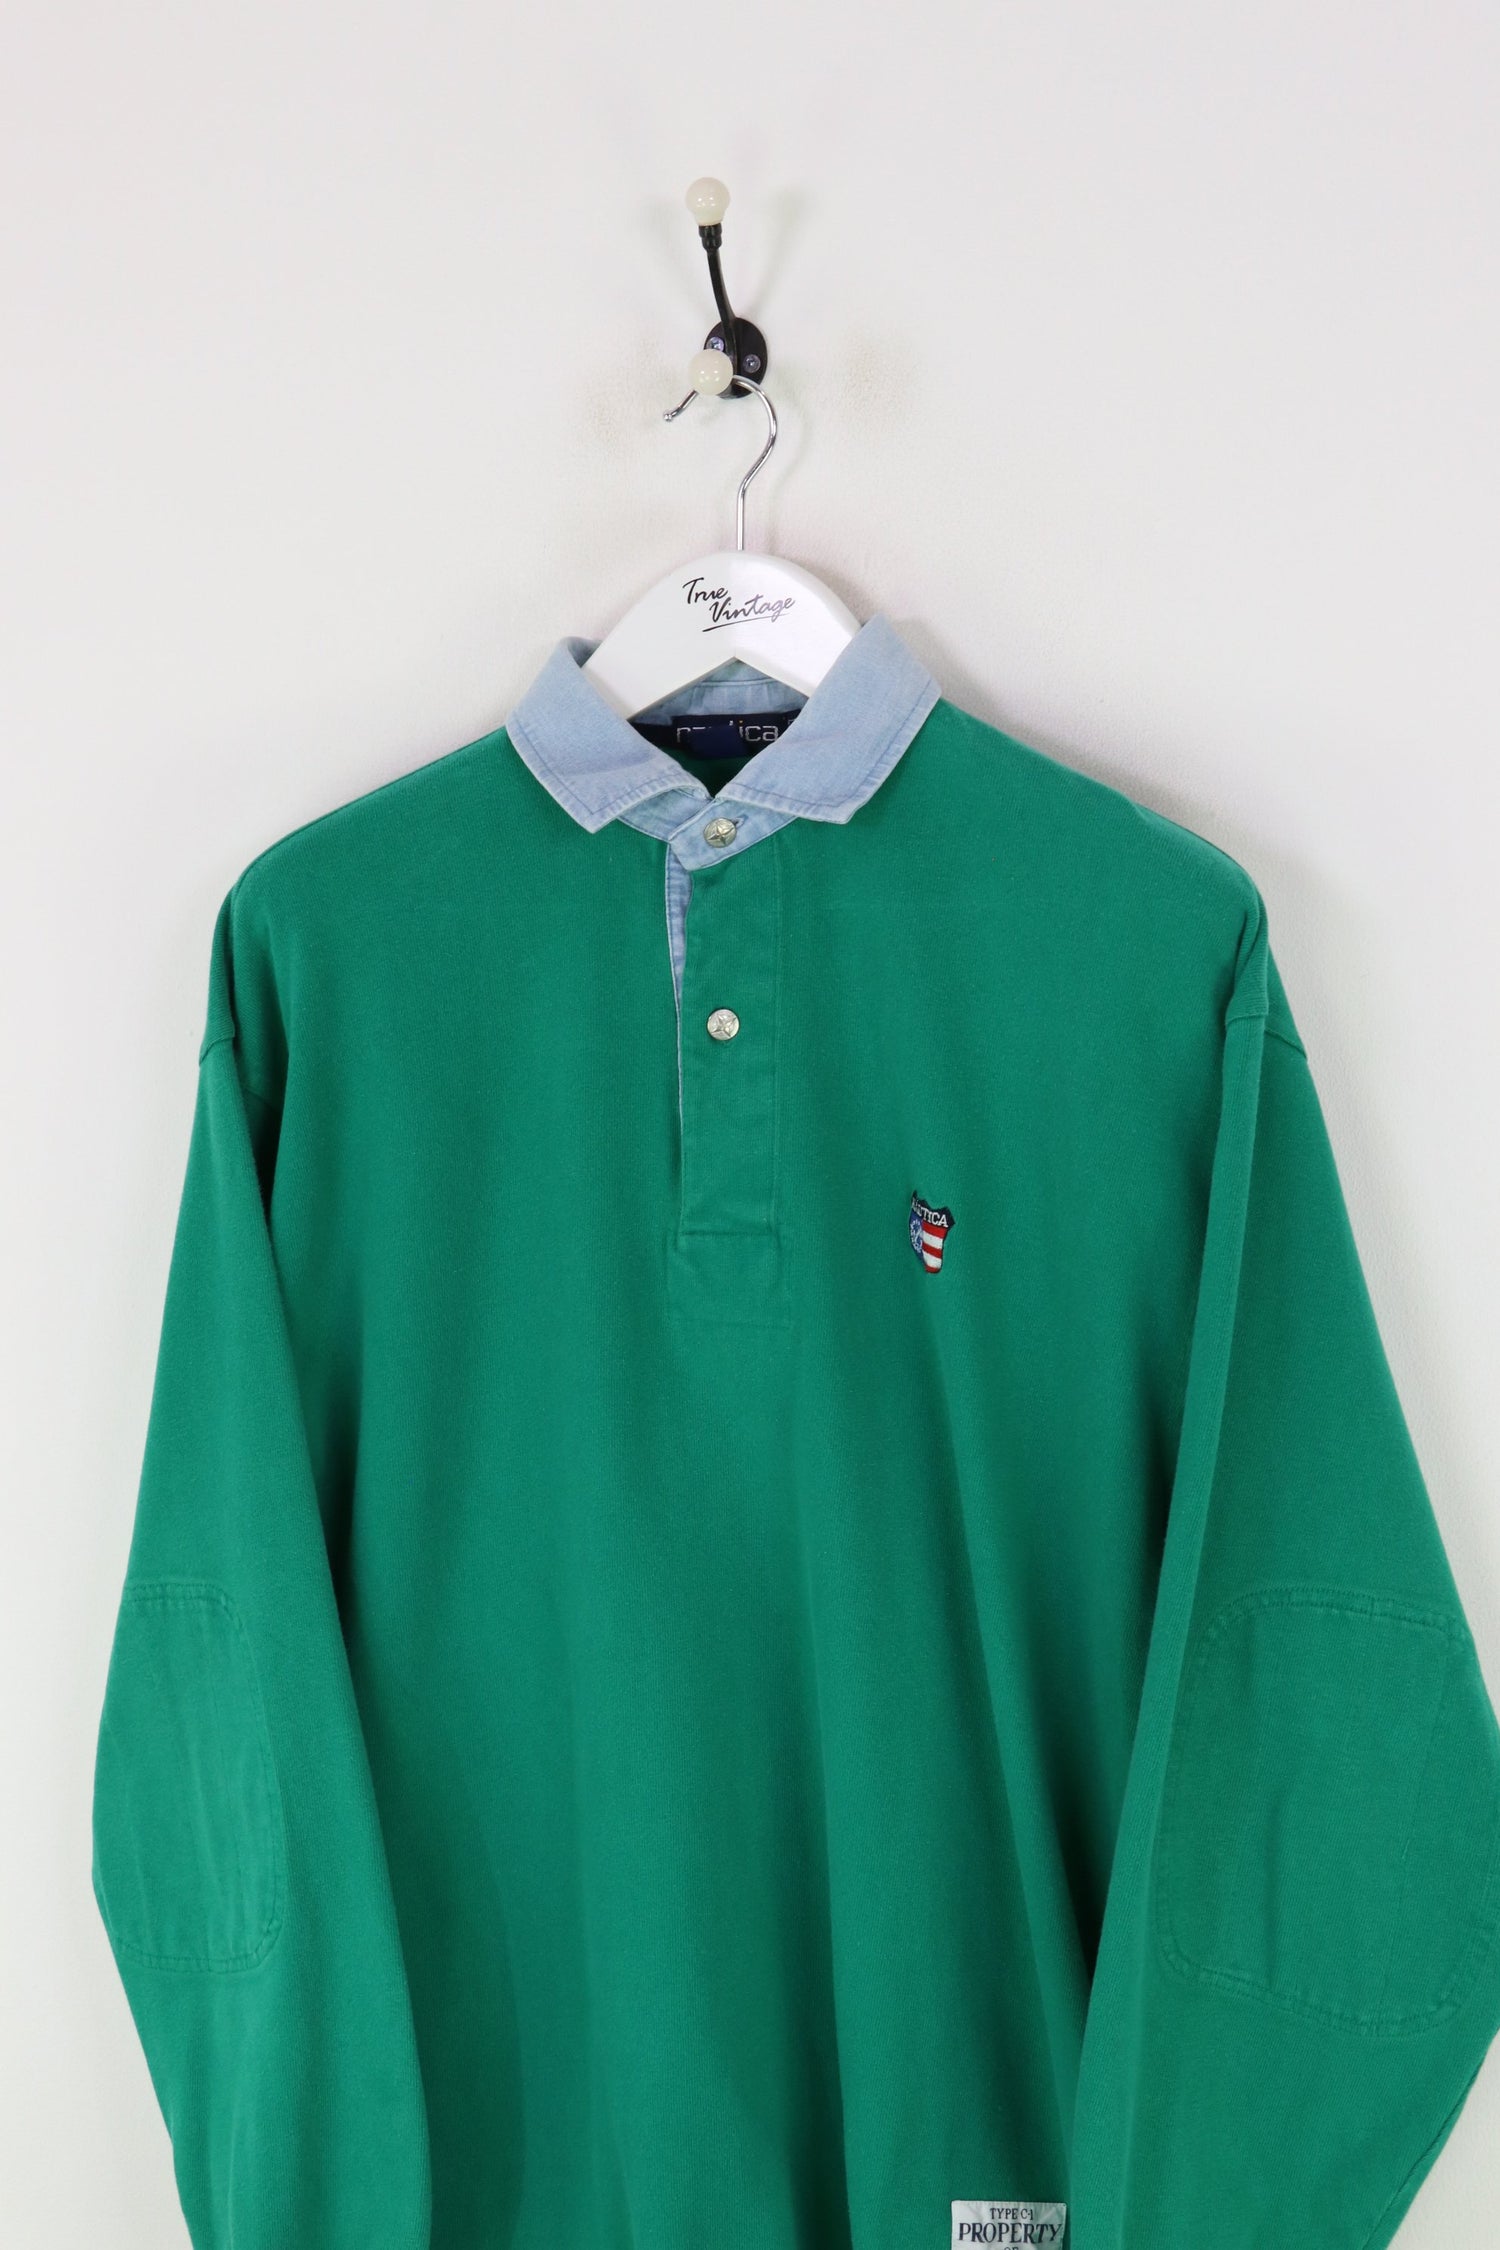 Nautica Rugby Top Green Large